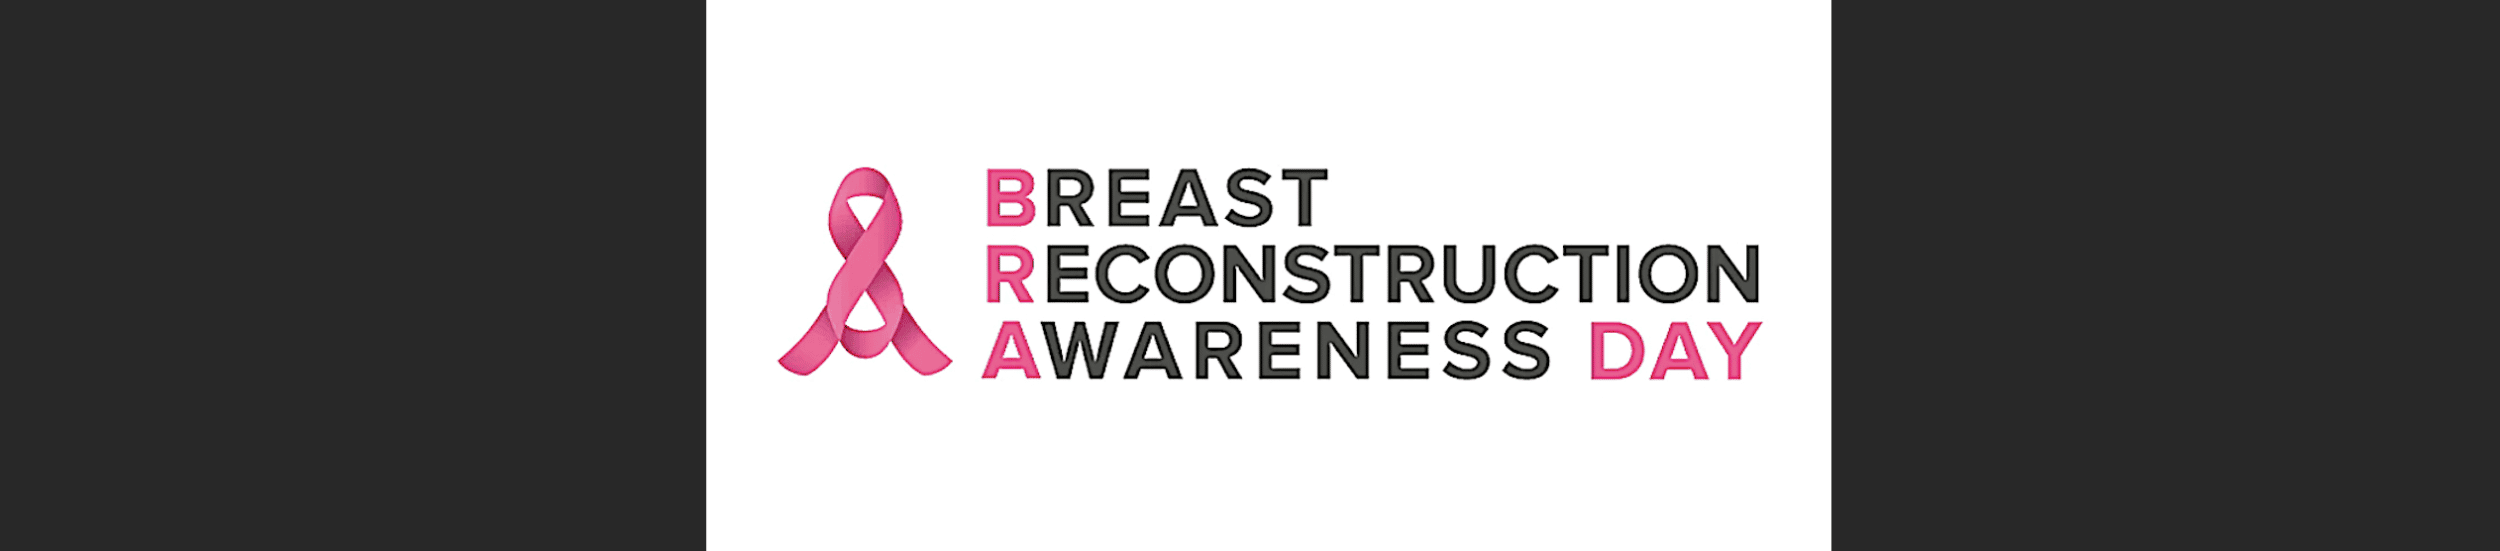 UTMB honors breast cancer survivors for Breast Reconstruction Awareness (BRA)  Day